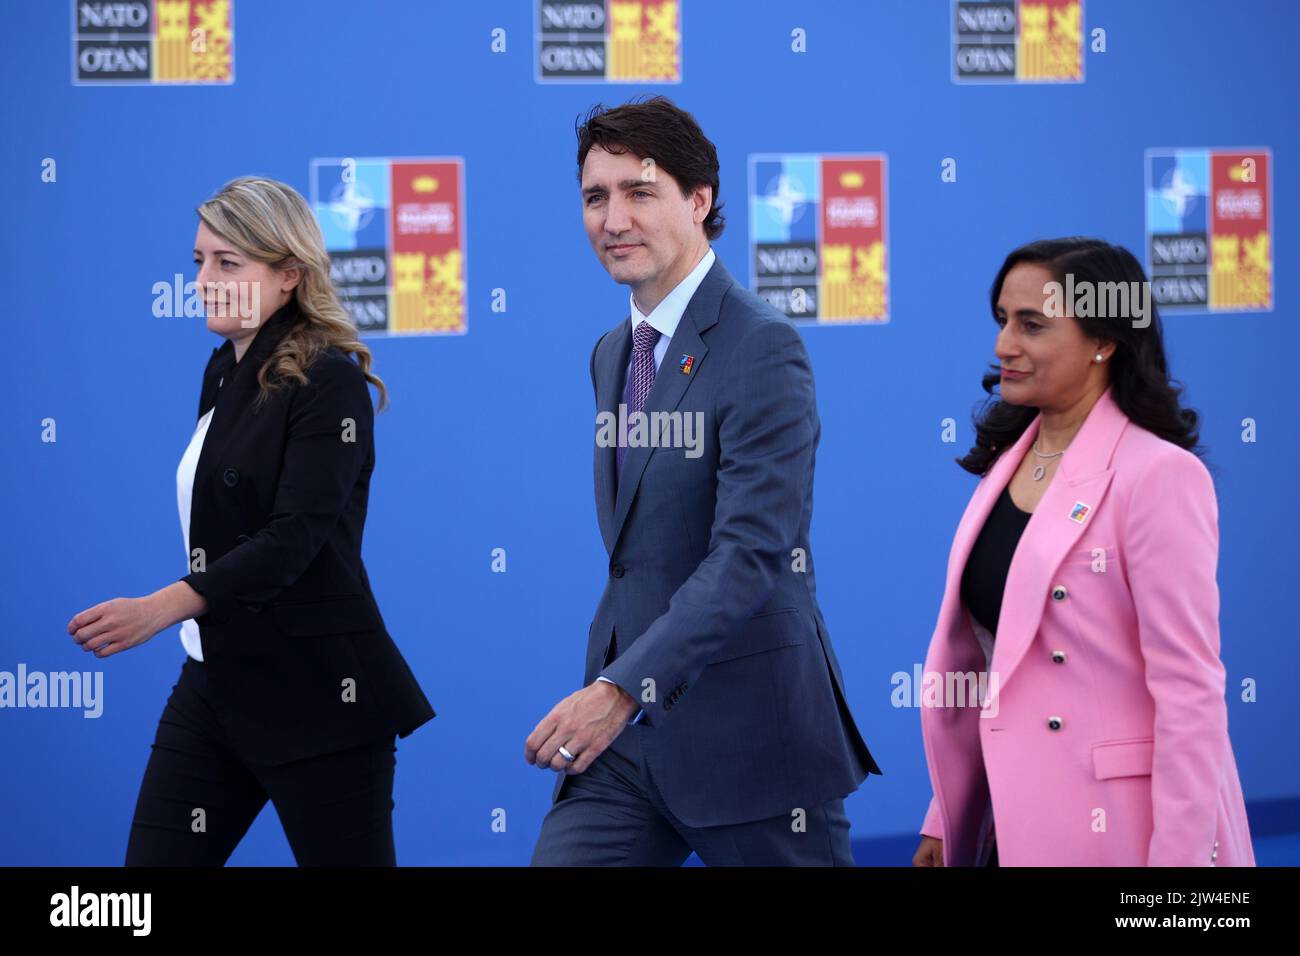 Spain, Madrid - 30 June, 2022: Canada's Prime Minister Justin Trudeau (C) and Foreign Minister Melanie Joly (L) attend the NATO summit in Madrid, Spai Stock Photo